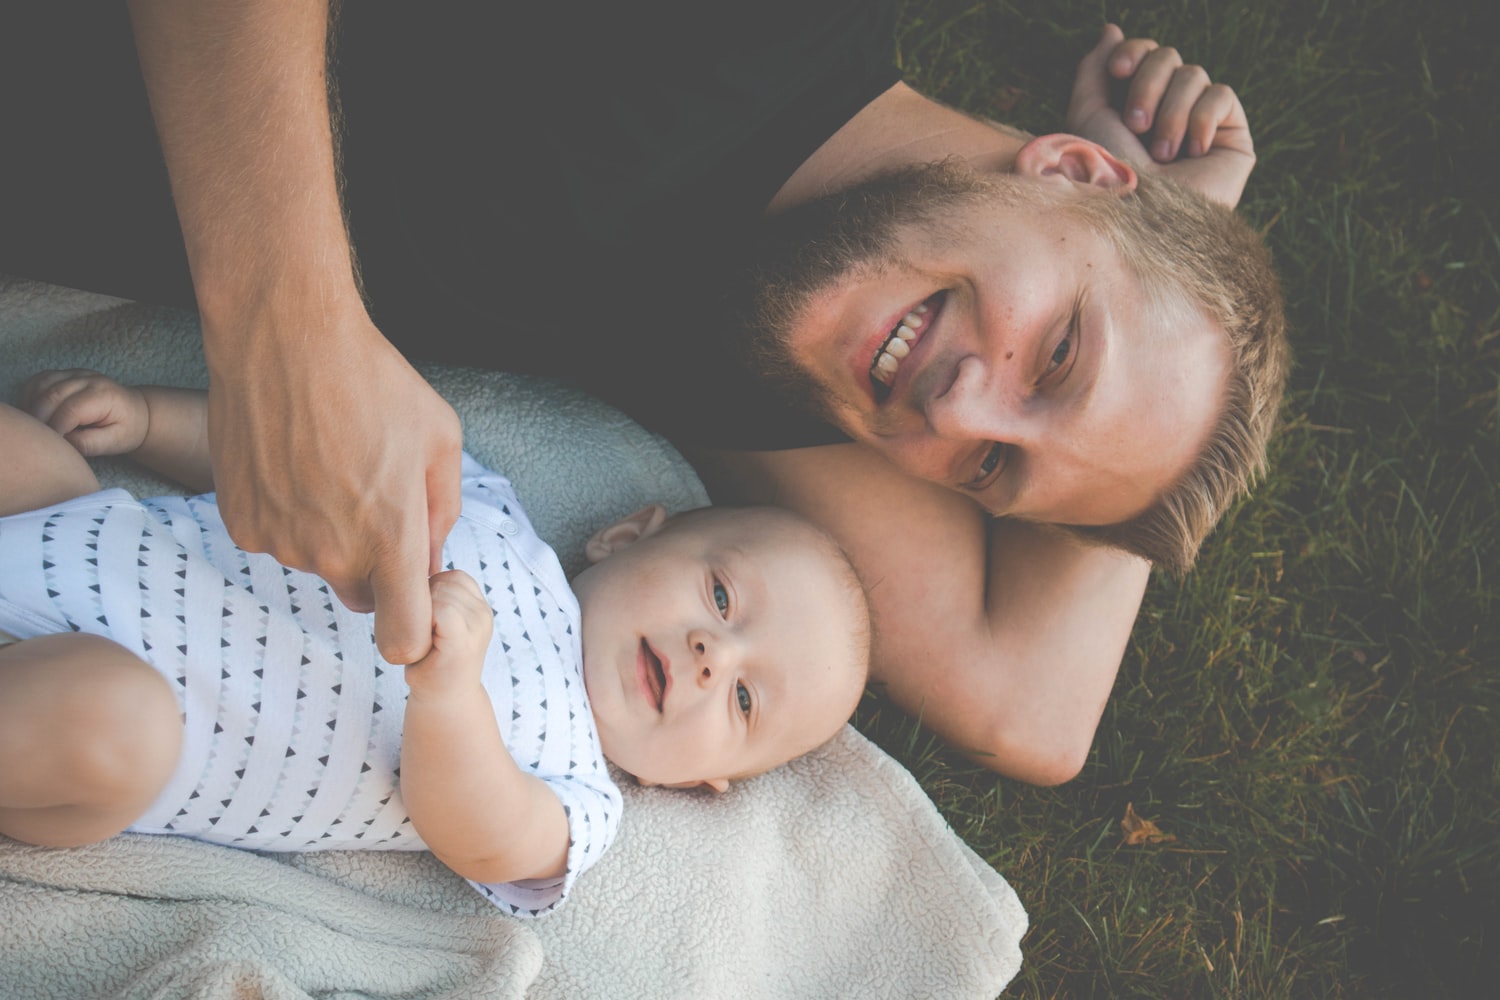 New initiative Launched to Help Single Fathers in Hungary